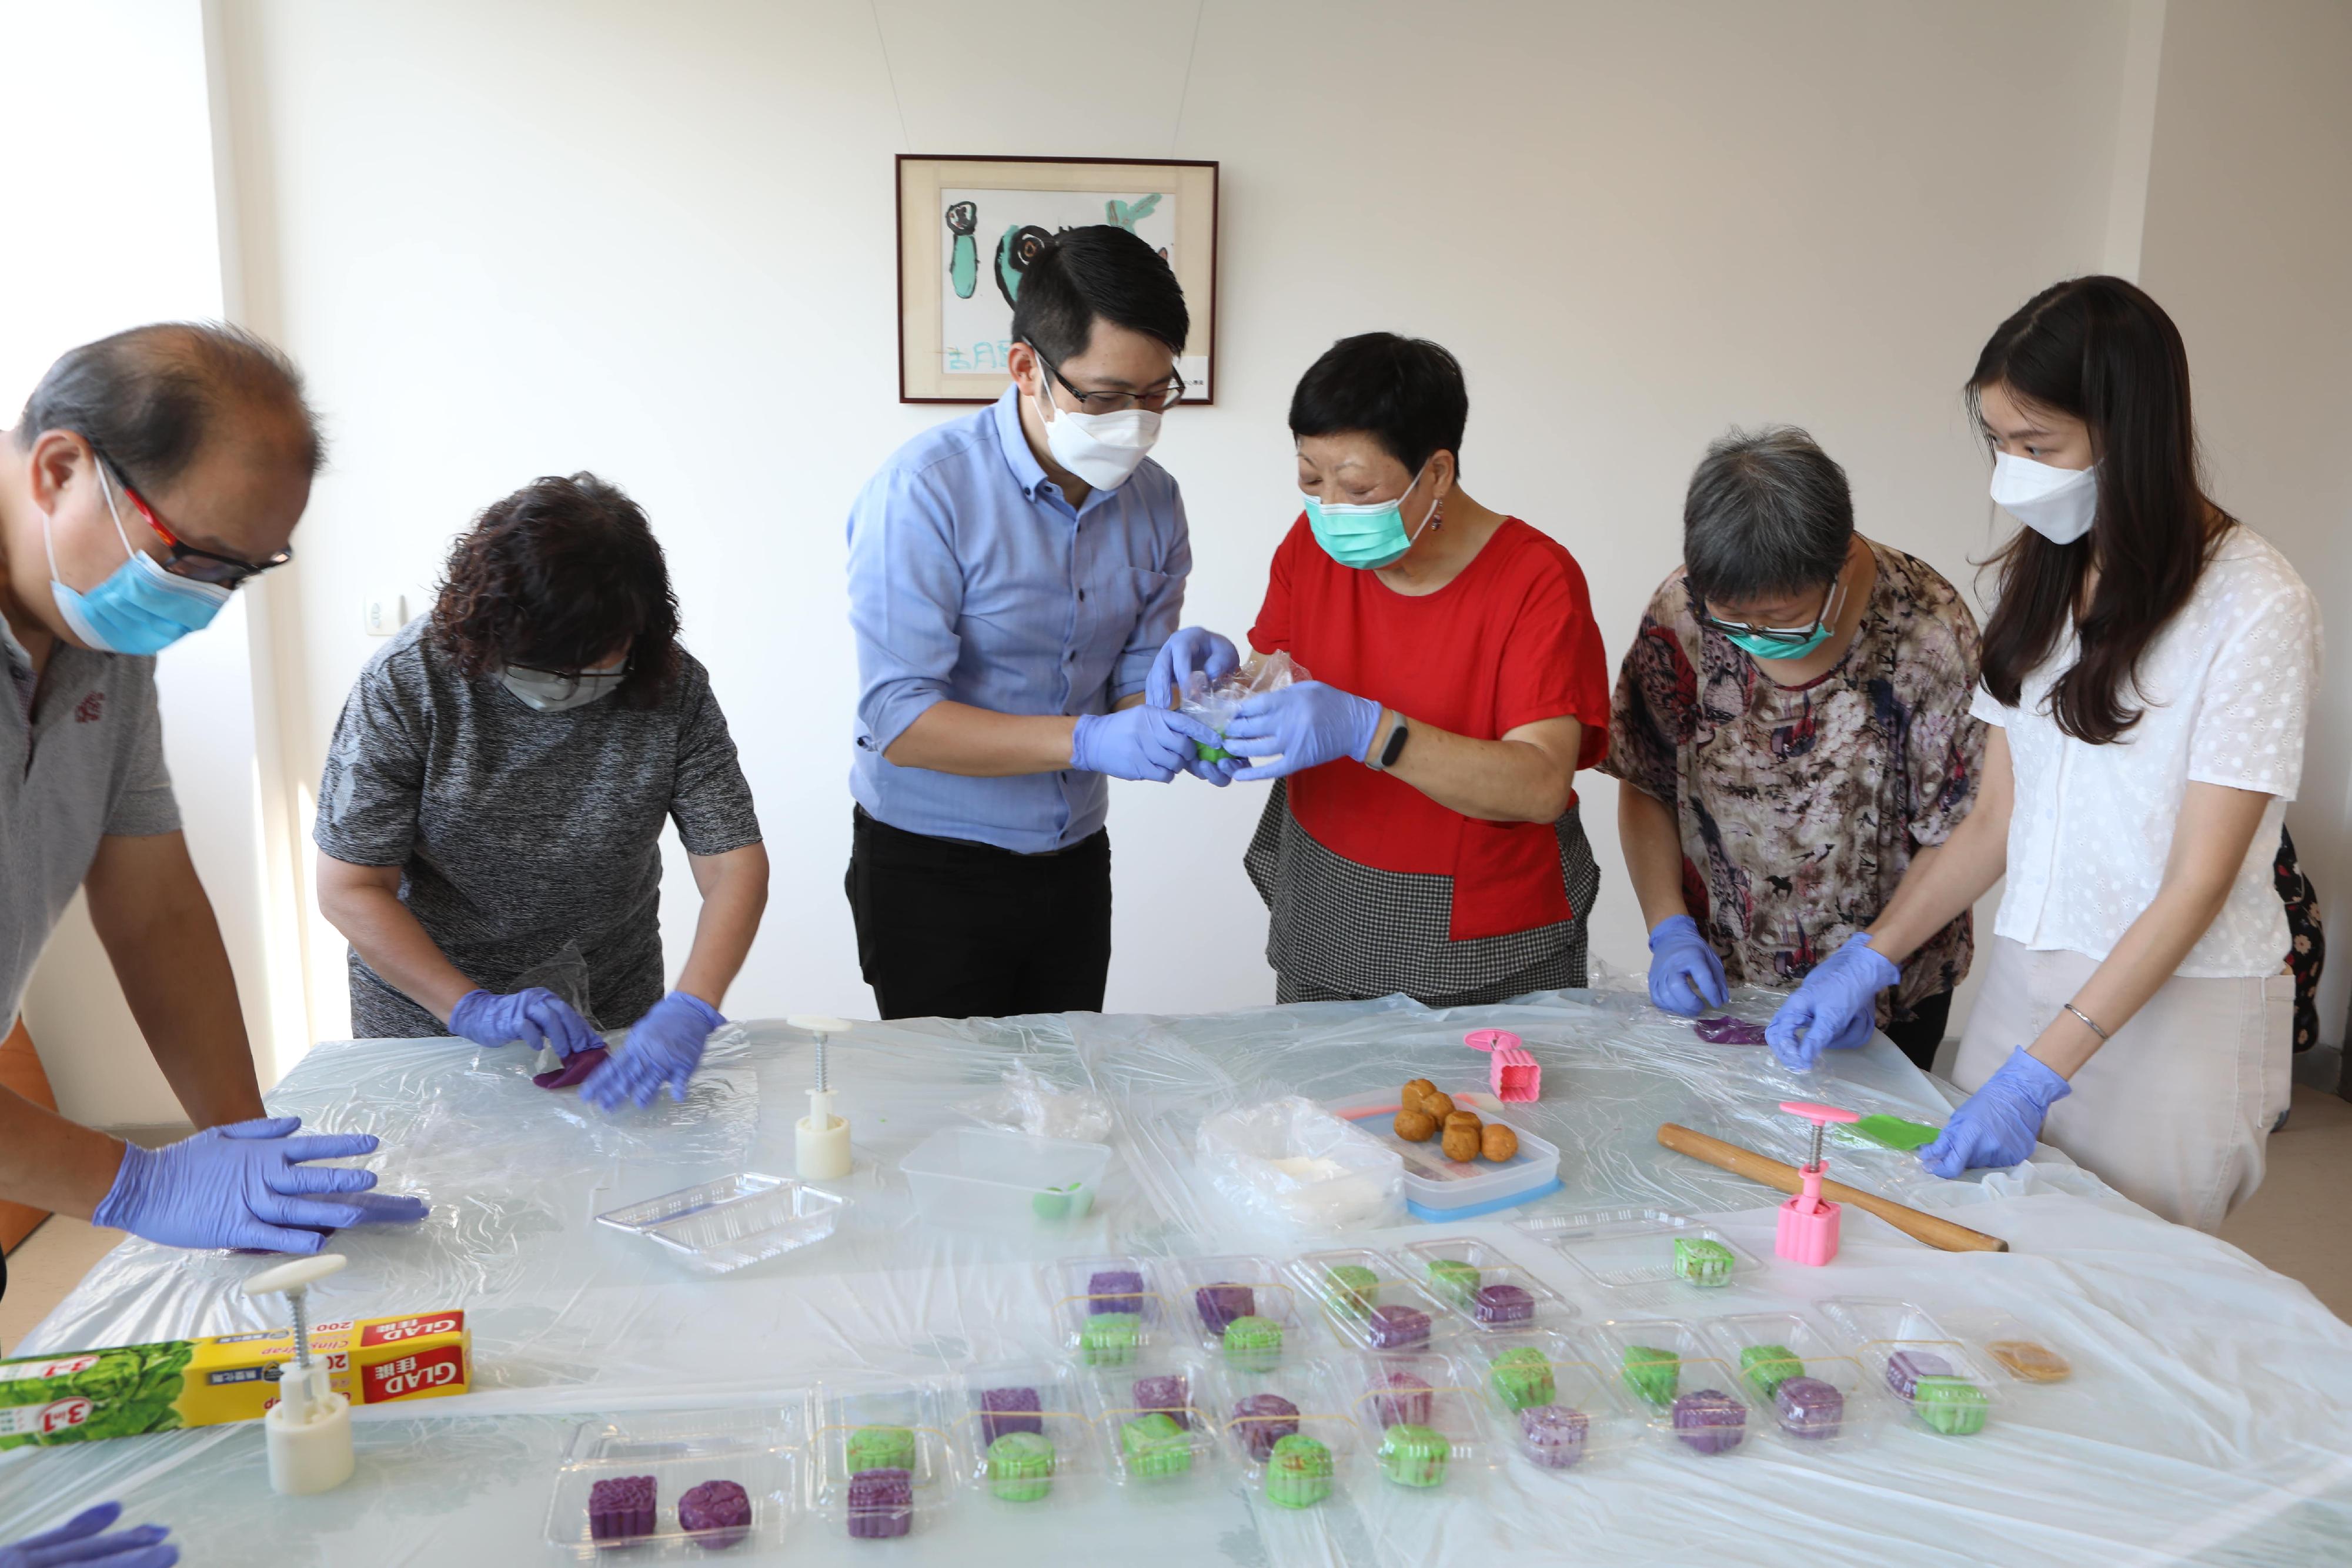 Mid-Autumn Festival celebration activities are arranged by various clusters of the Hospital Authority. The Patient Resources Centre of Tuen Mun Hospital arranges the patient group, "Sweet Buddies", and diabetes patients to gather and make healthy mooncakes.